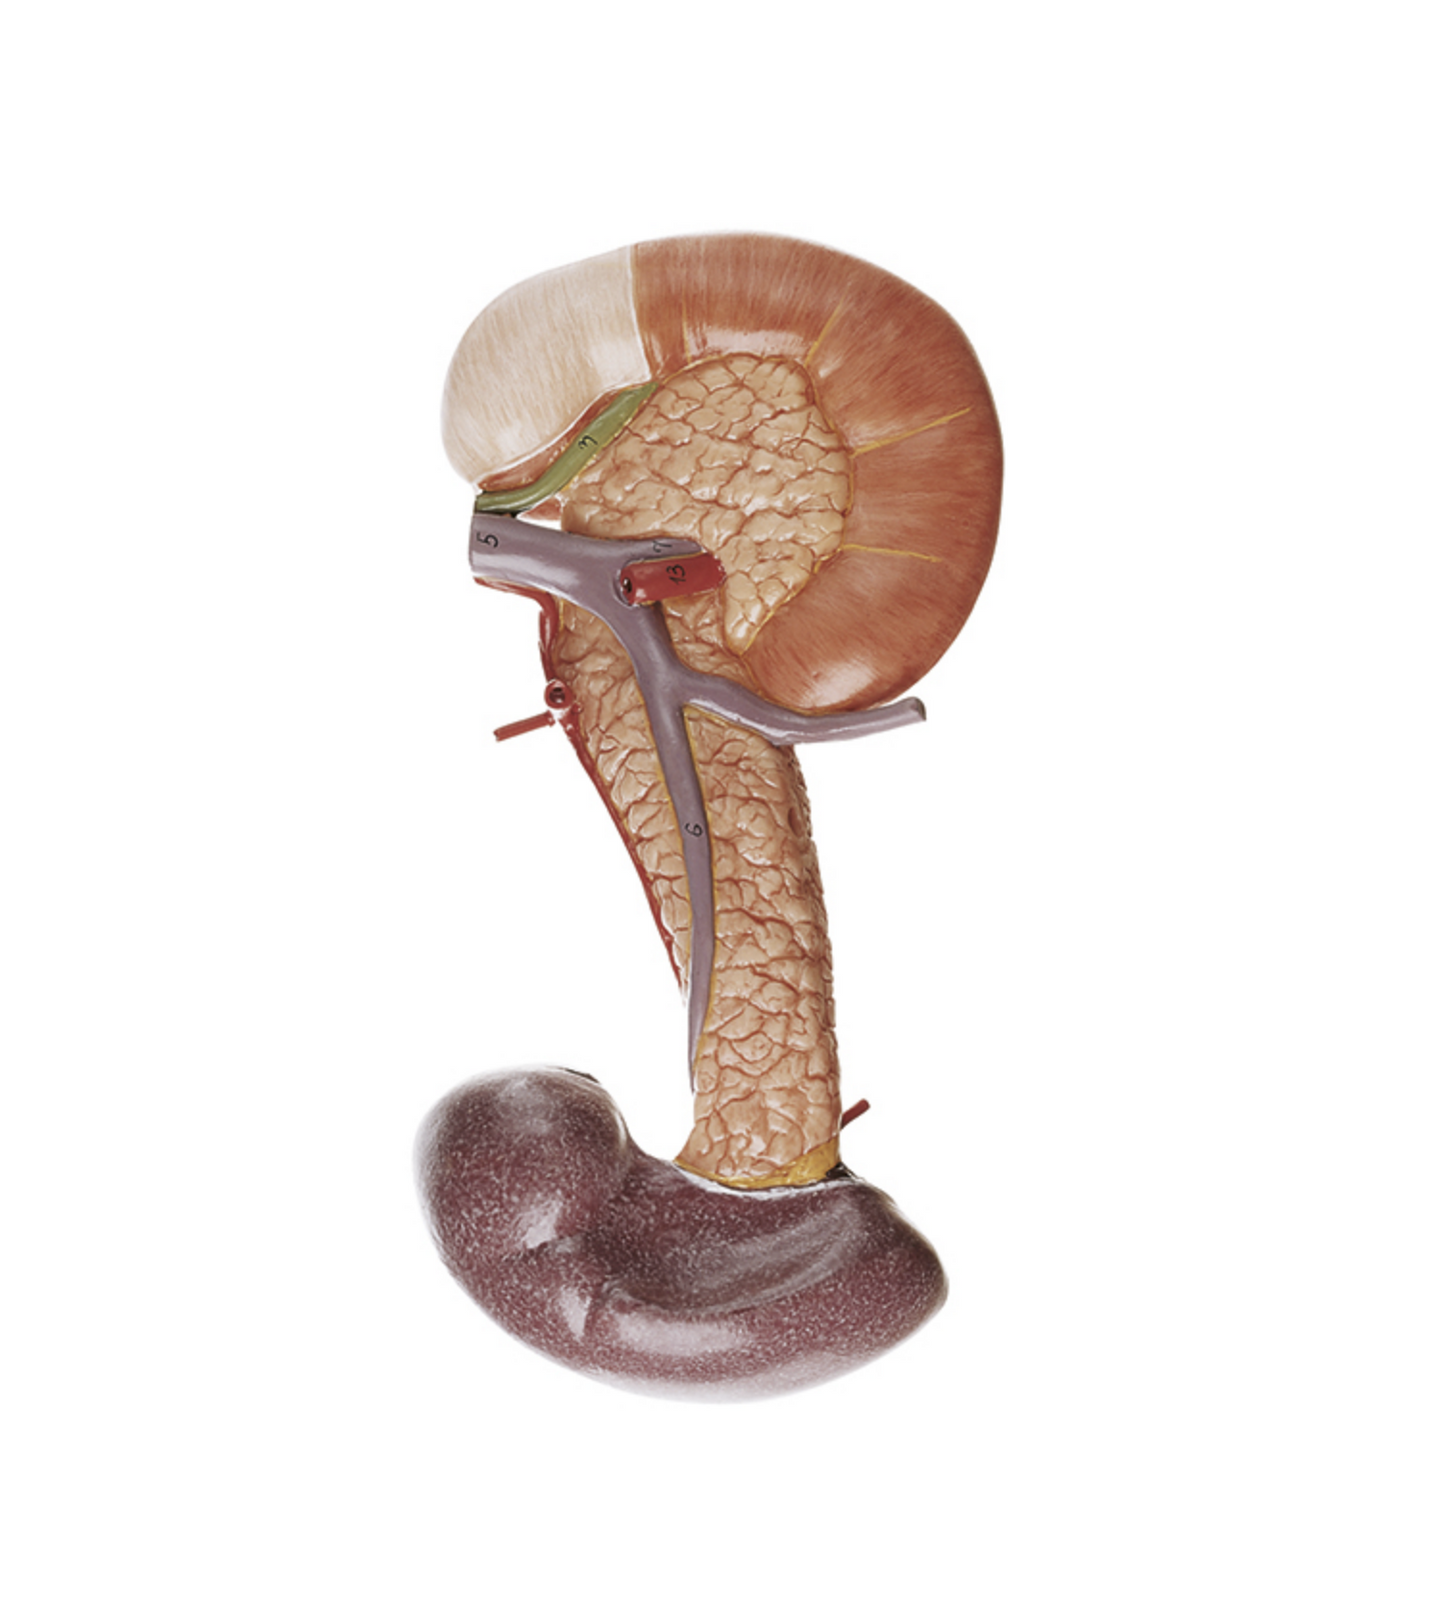 Model of pancreas with spleen and duodenum